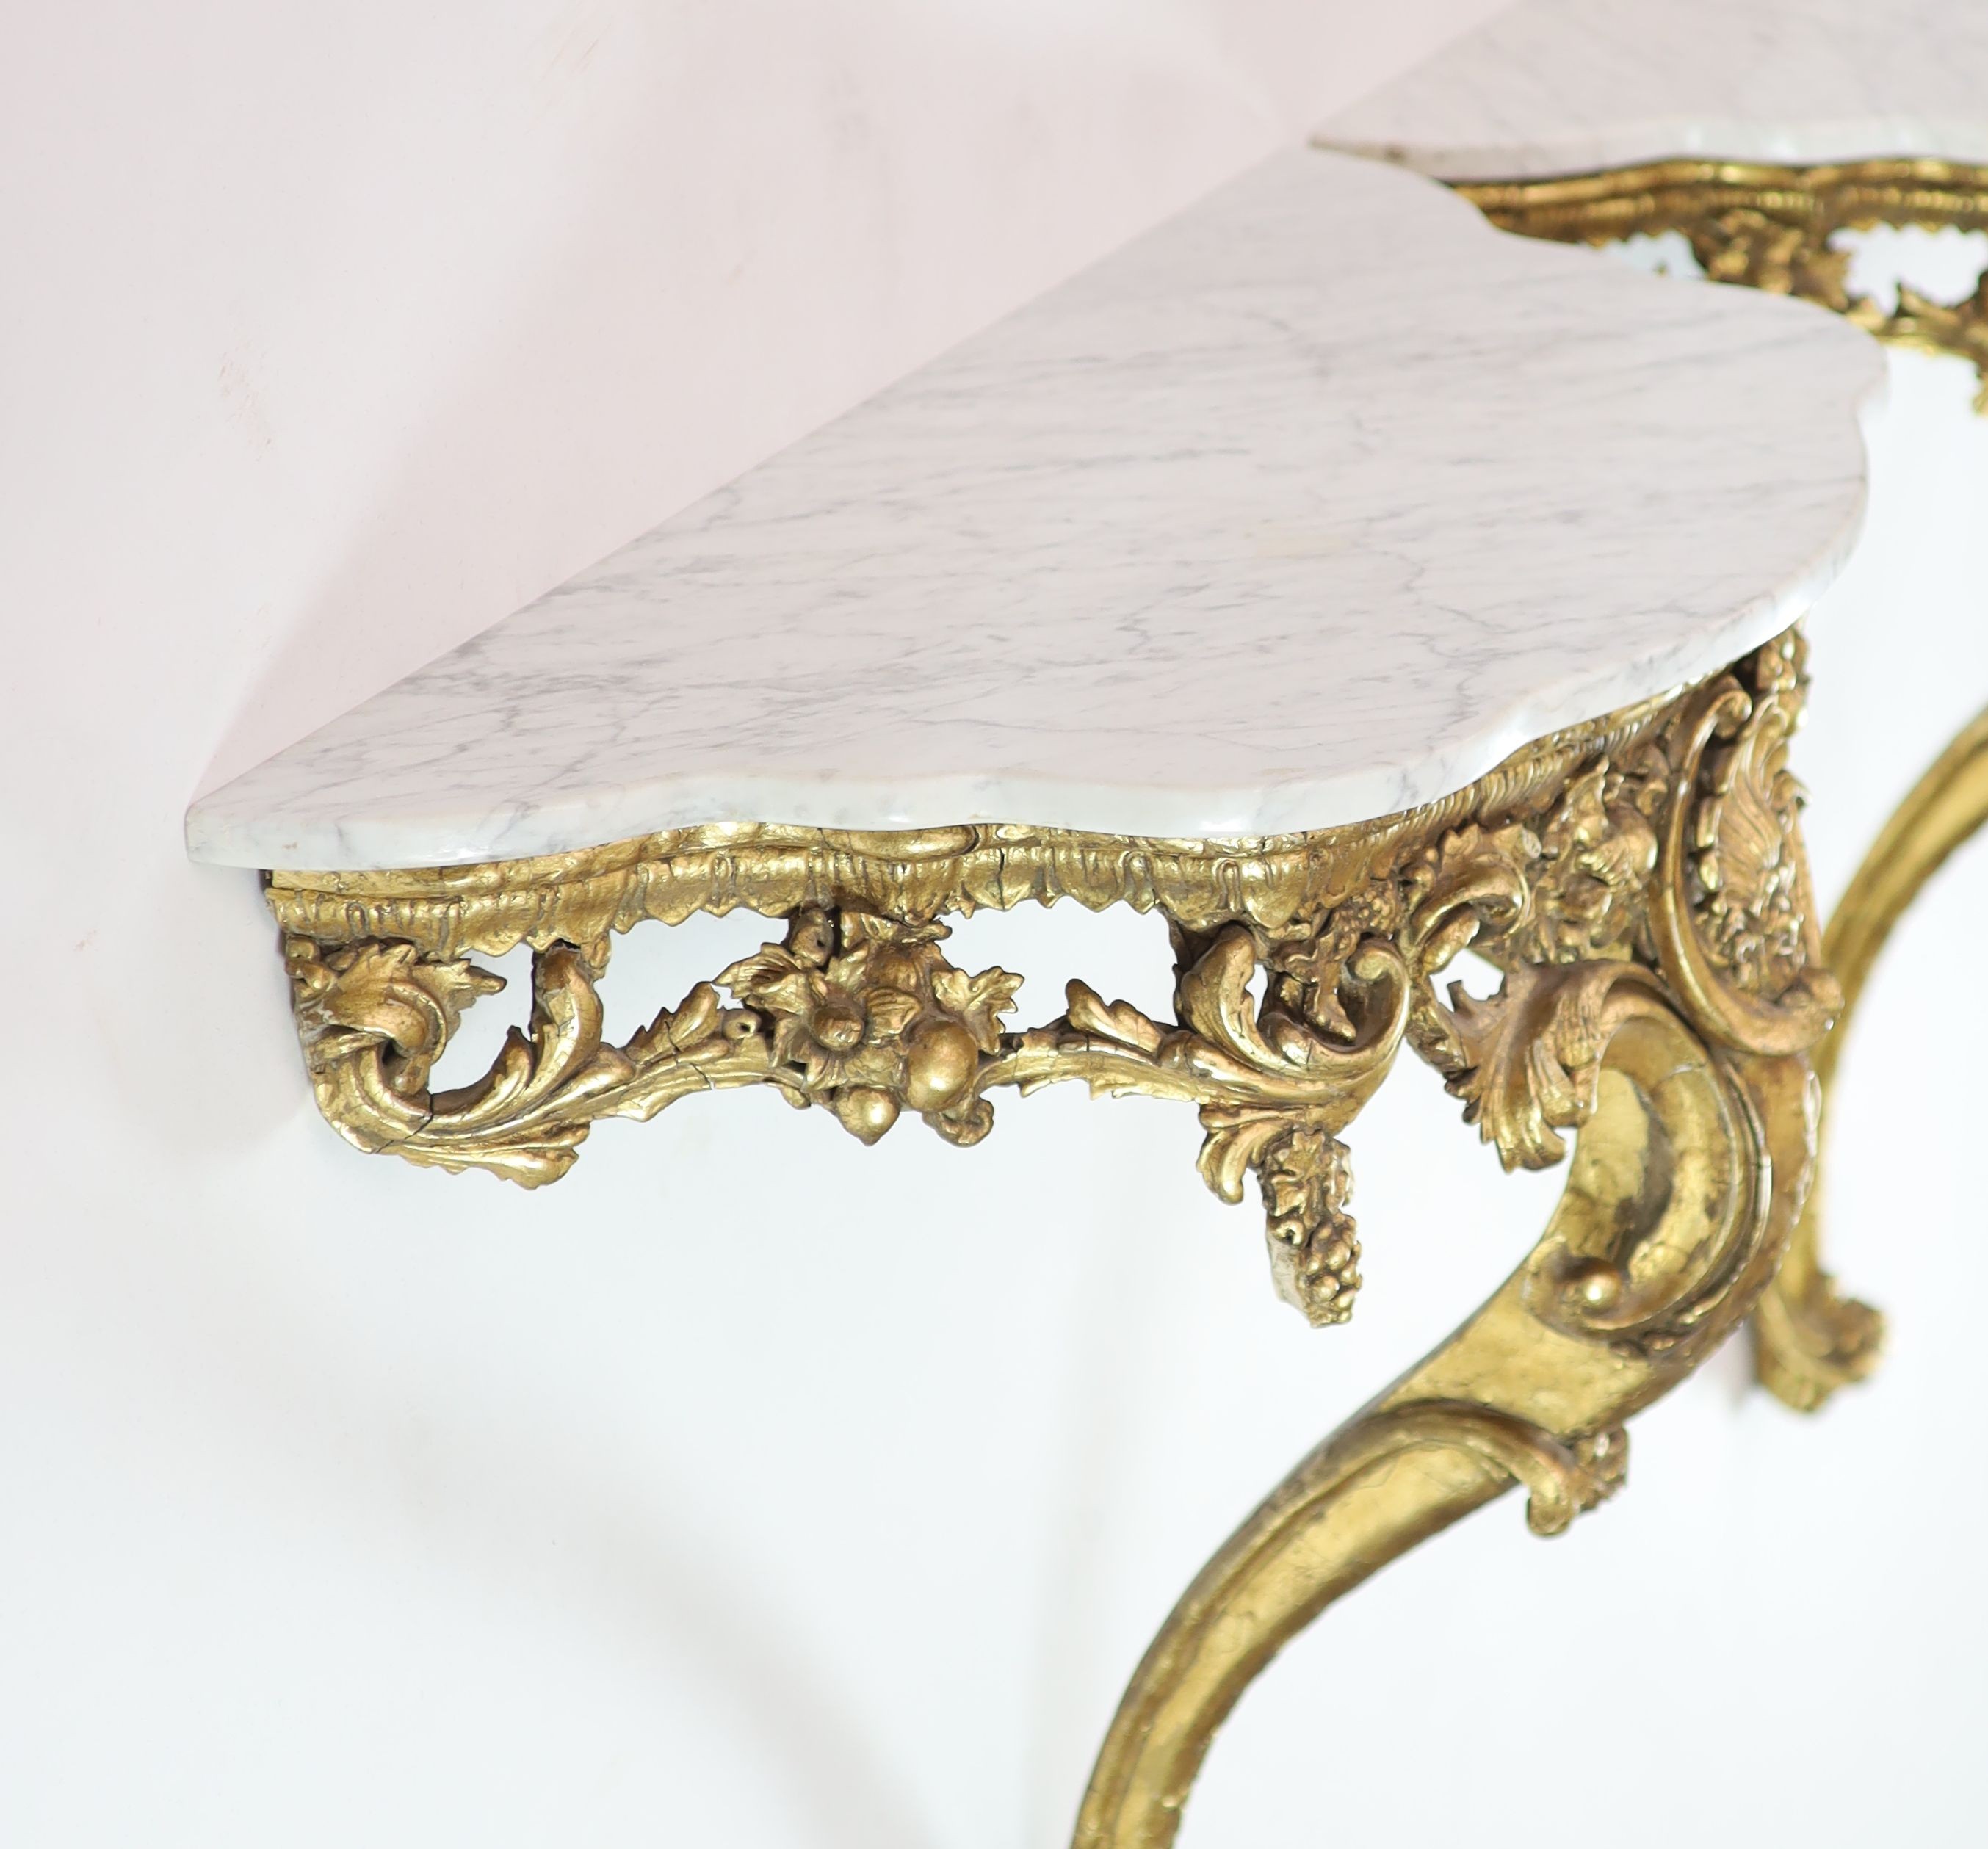 A pair of Louis XV style carved giltwood console tables H 84cm. W 98cm. D 42cm.